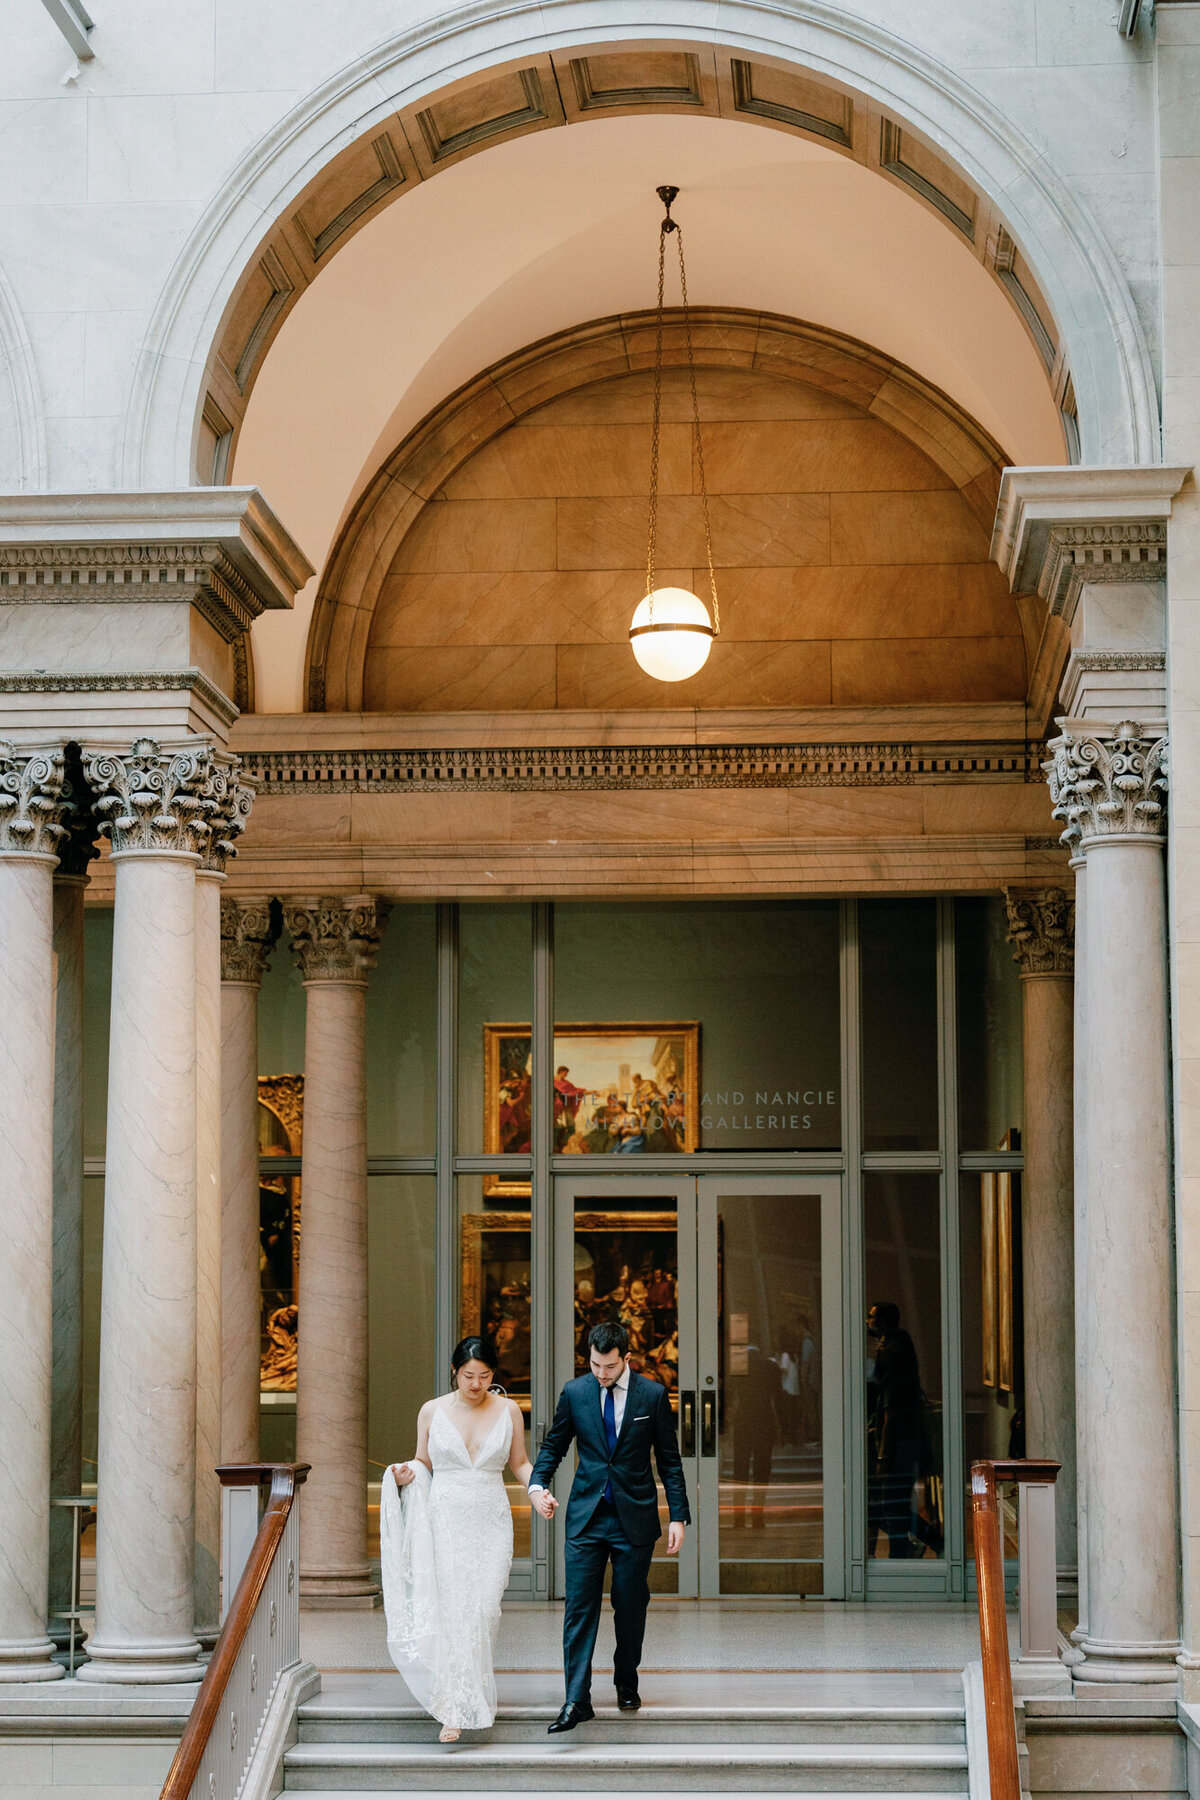 A quiet moment between newlyweds on their wedding day at the Art Institute of Chicago